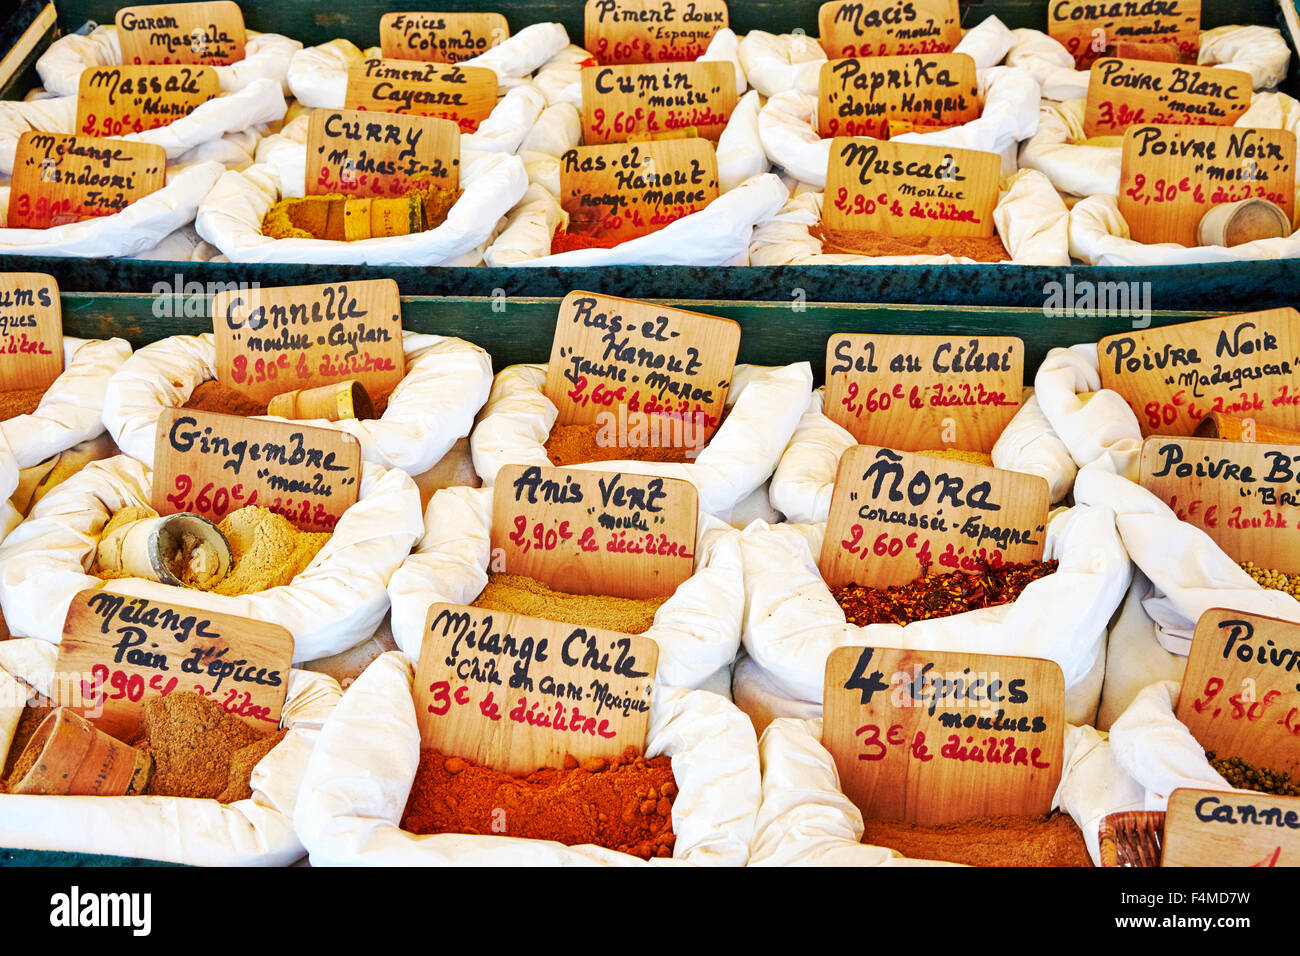 Street market stall display of spices in Objat, Correze, Limousin, France. Stock Photo